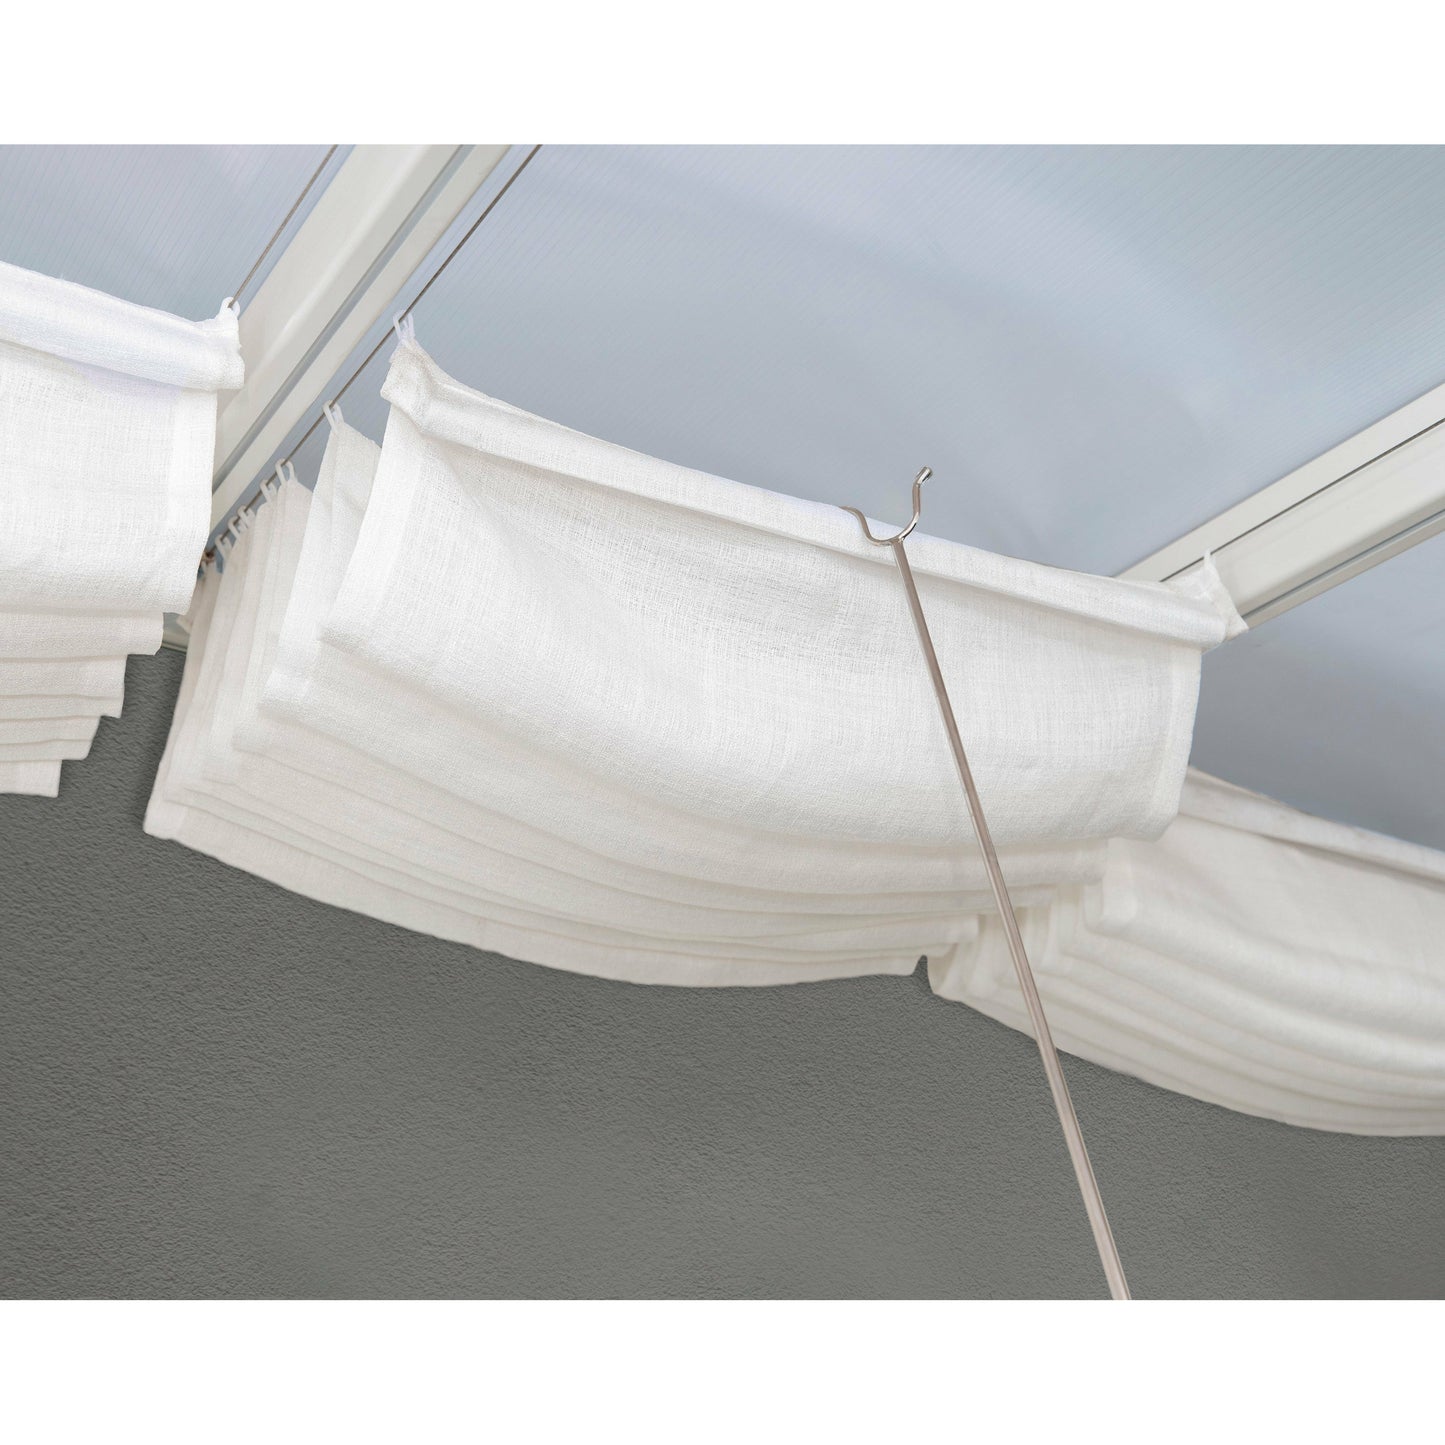 Palram Patio Cover Blinds 10' x 30' White